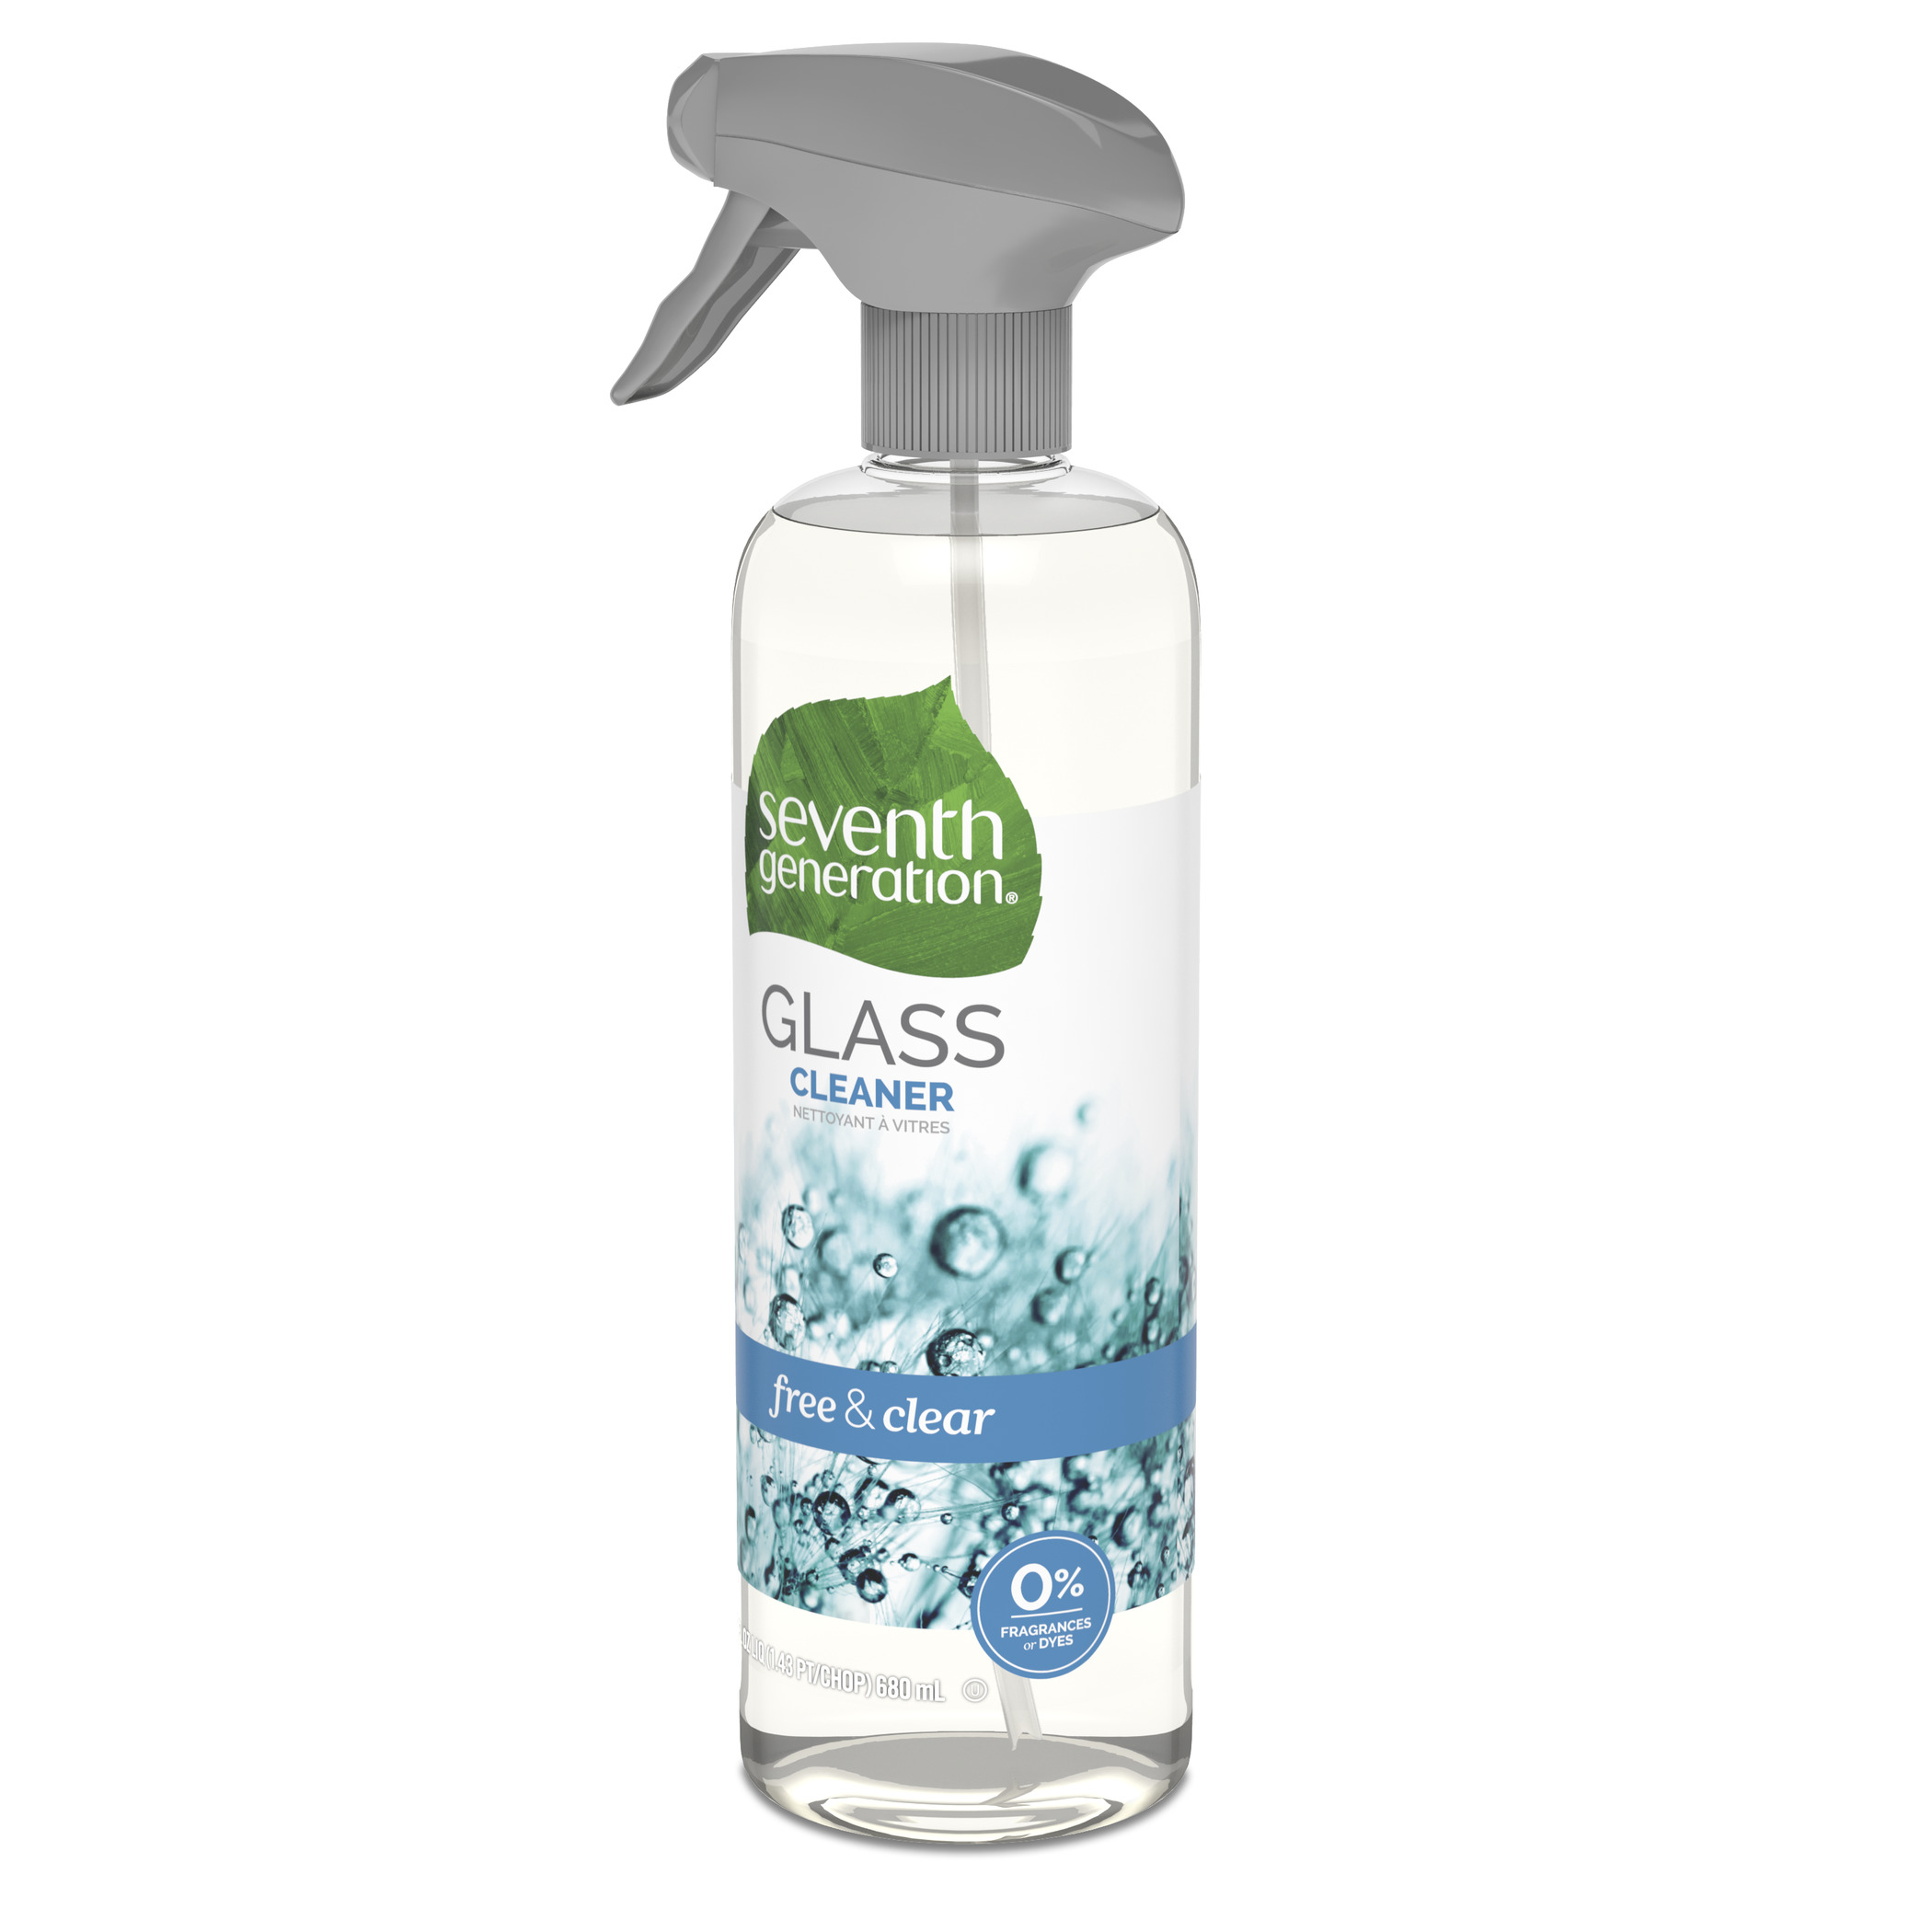 Seventh Generation Glass Cleaner, Free & Clear, 23 oz - image 4 of 6